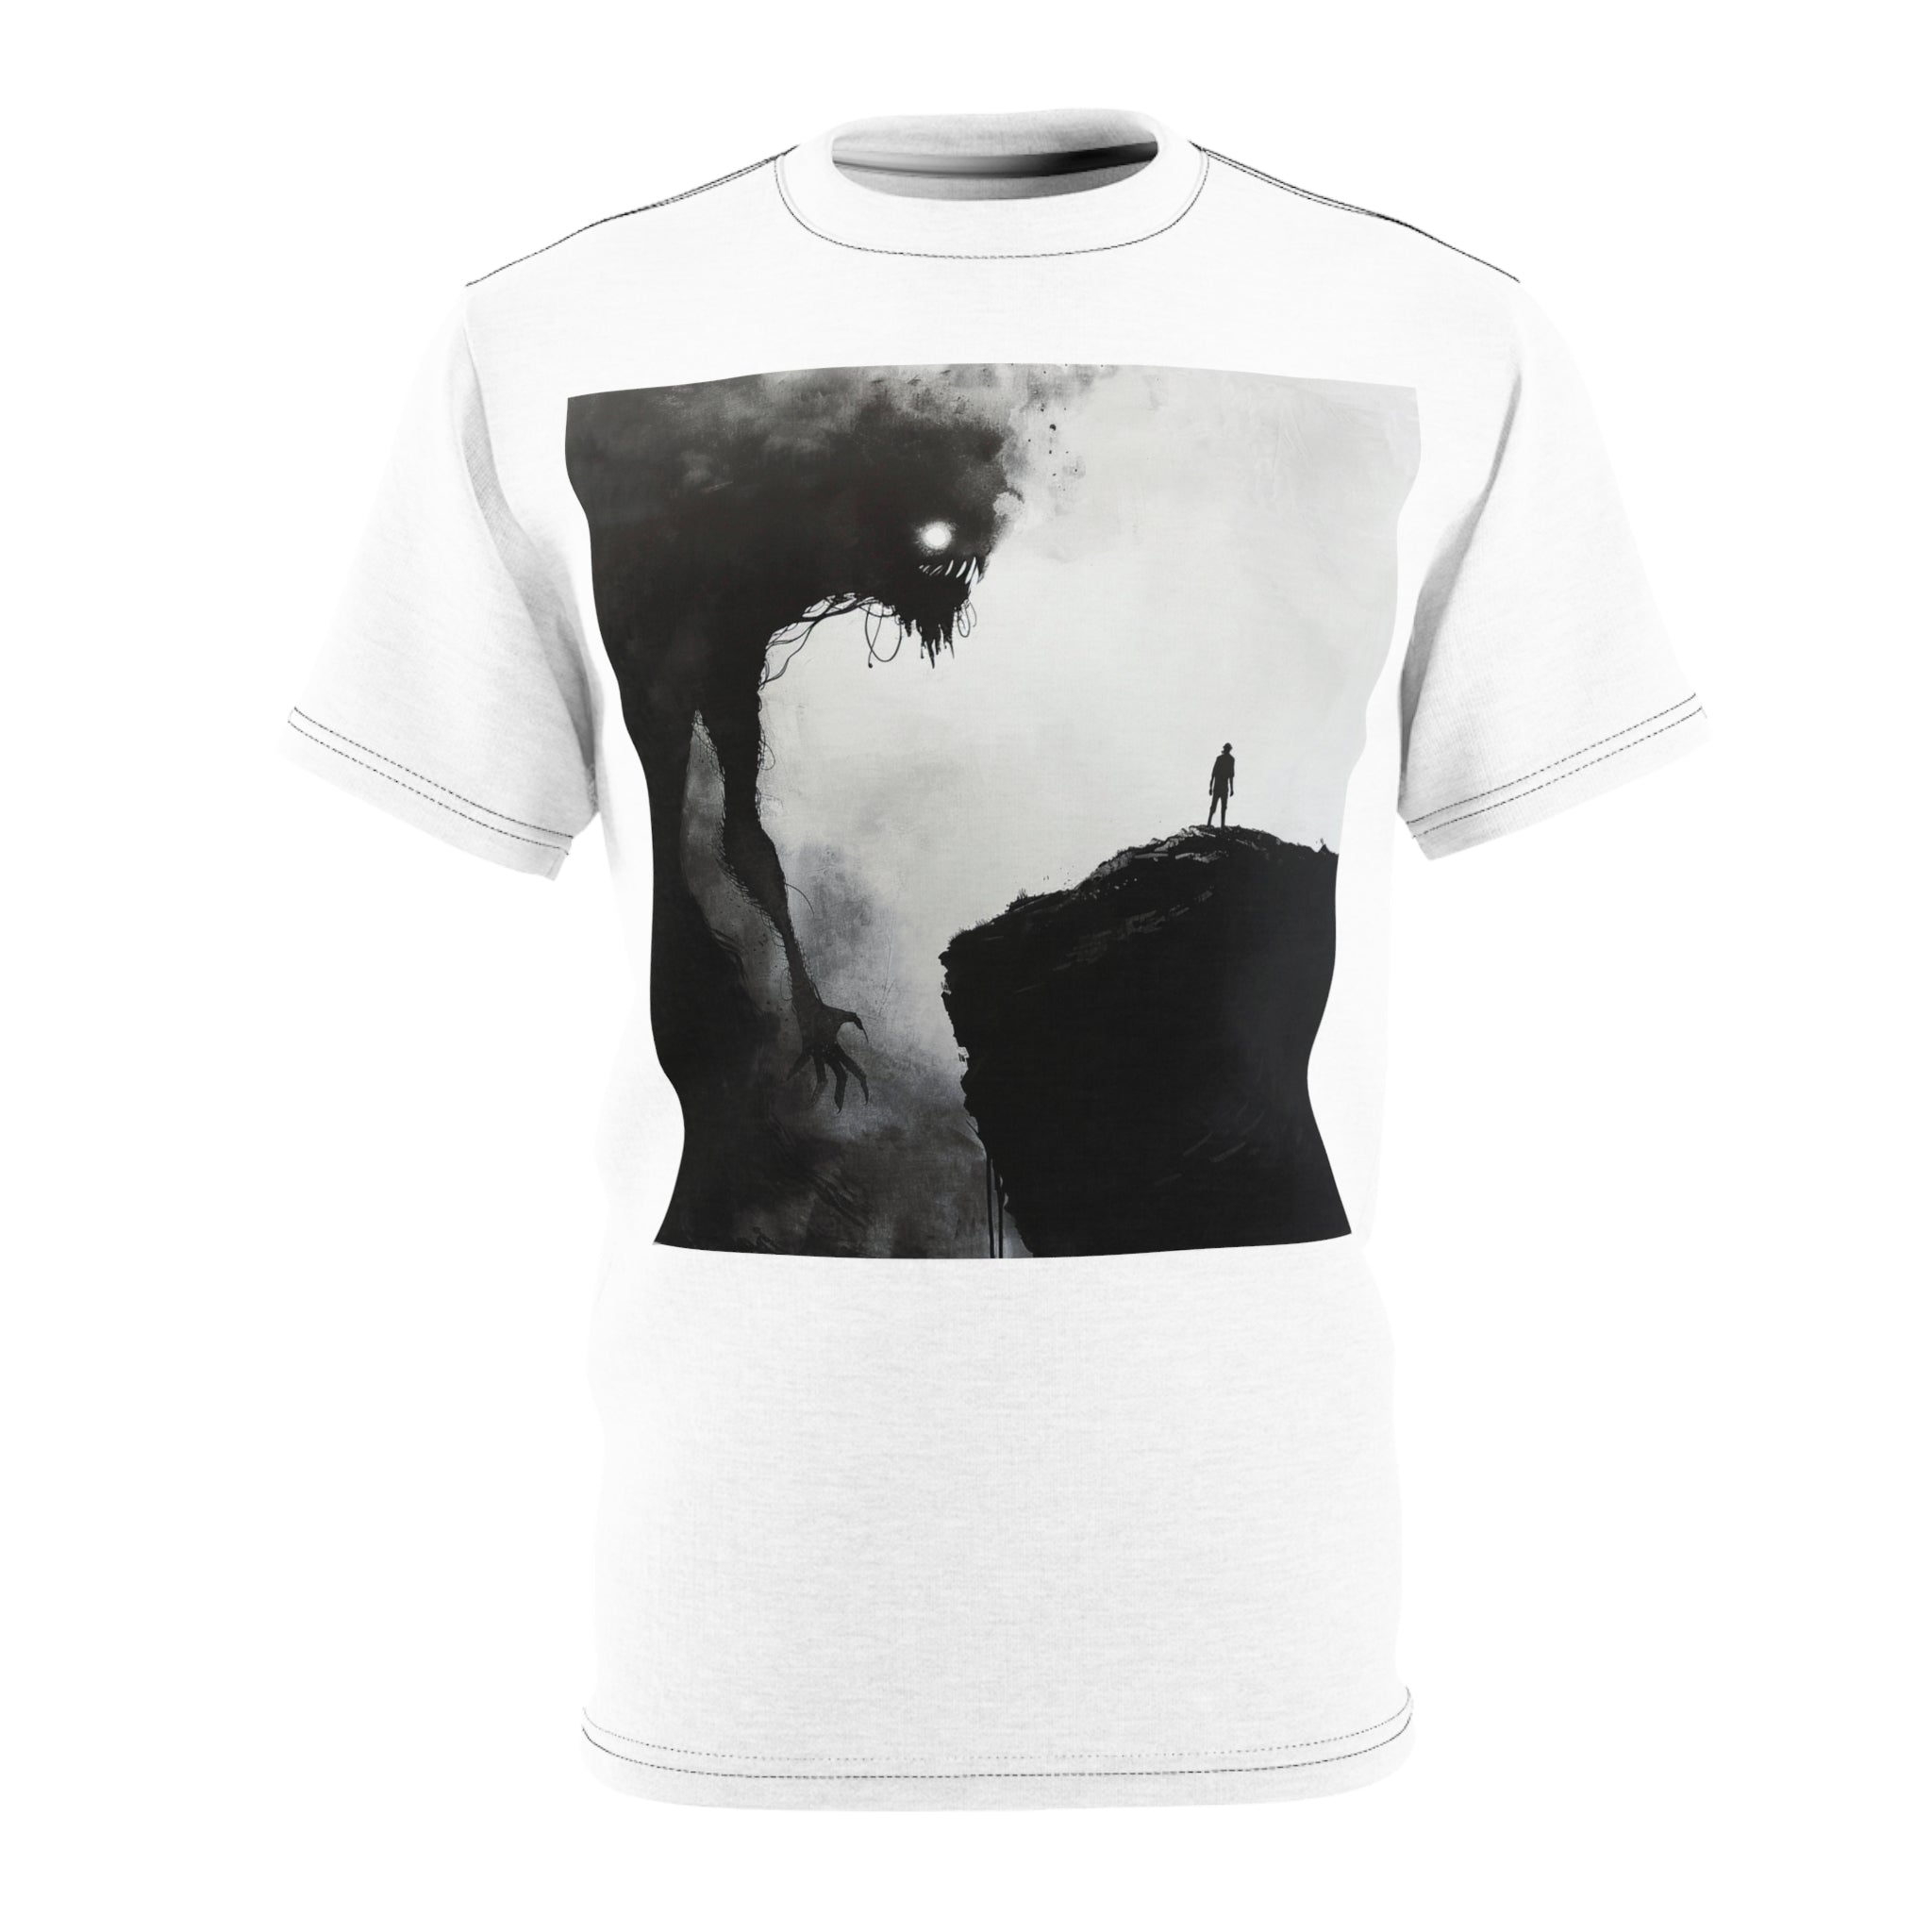 The image features a vibrant, high-quality unisex tee showcasing an evocative scene: a lone man on a cliff, facing against the immense shadow of a monster - representing his own fears and challenges. The meticulous cut and sew craftsmanship ensures that the inspiring design envelops the wearer completely, making it a piece that’s not just worn, but lived in.